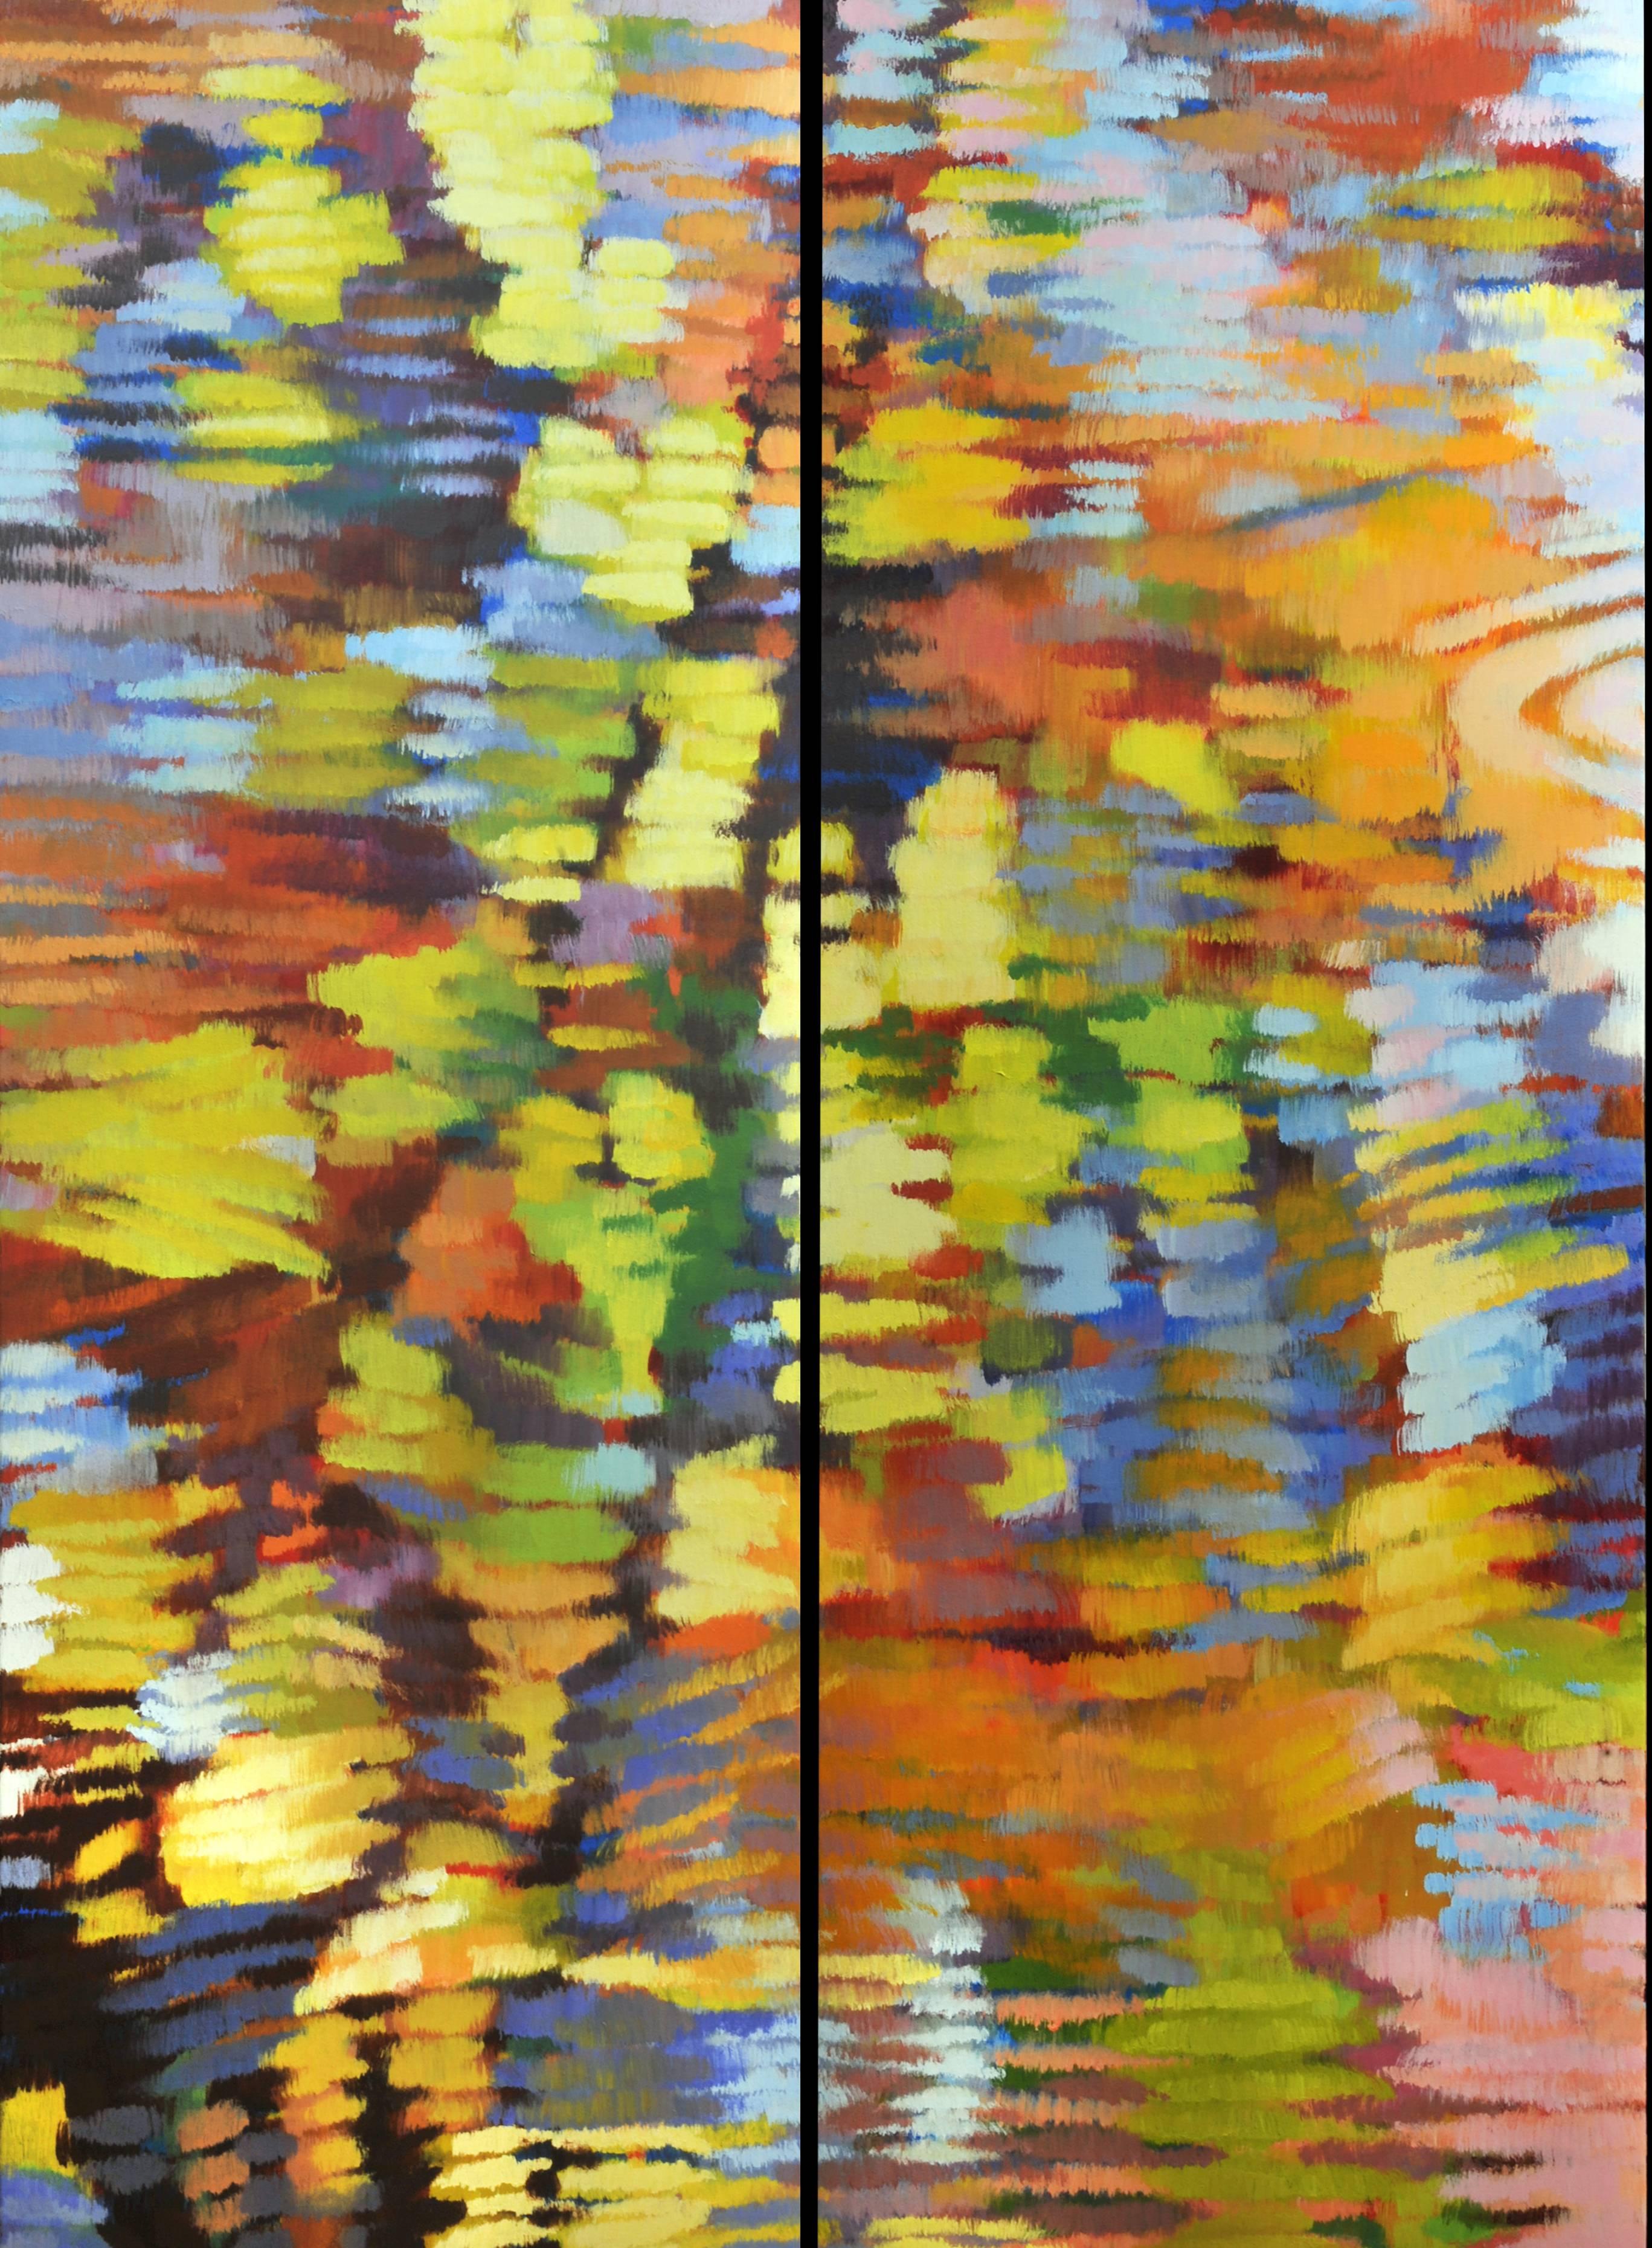 "Echo 1", Pair of Impressionist Style Oil Painting on Canvas, Waterscape Diptych